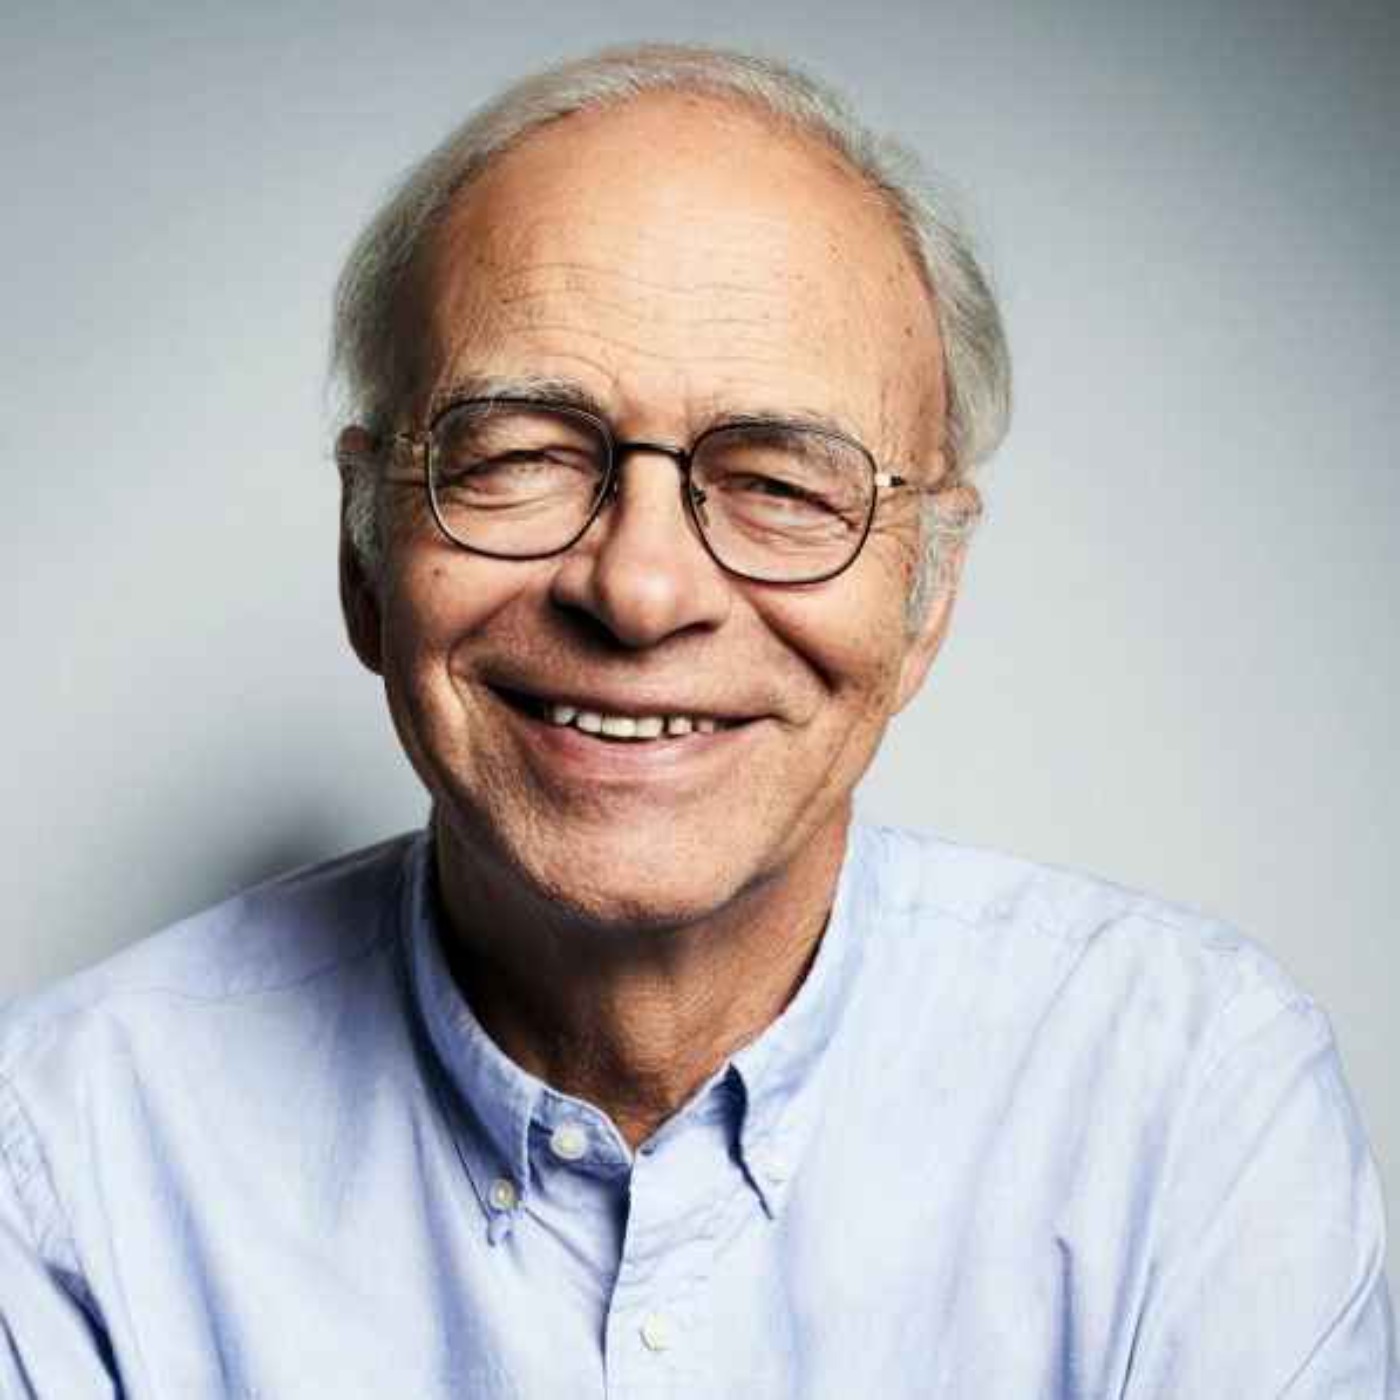 he Most Good You Can Do  - Peter Singer